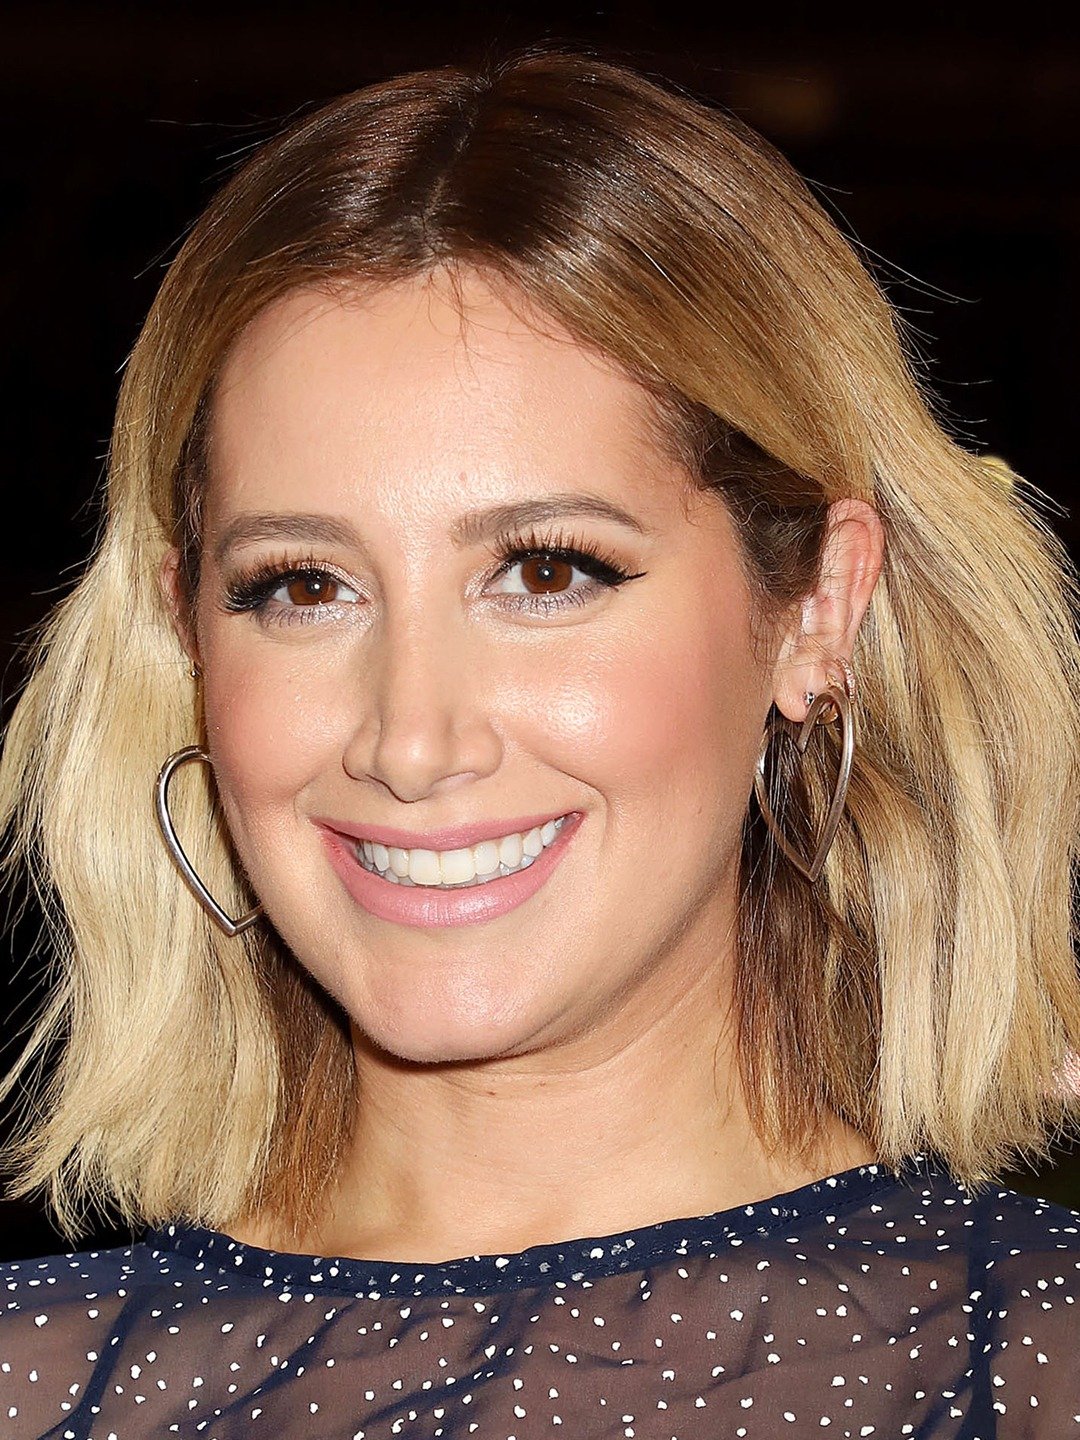 How tall is Ashley Tisdale?